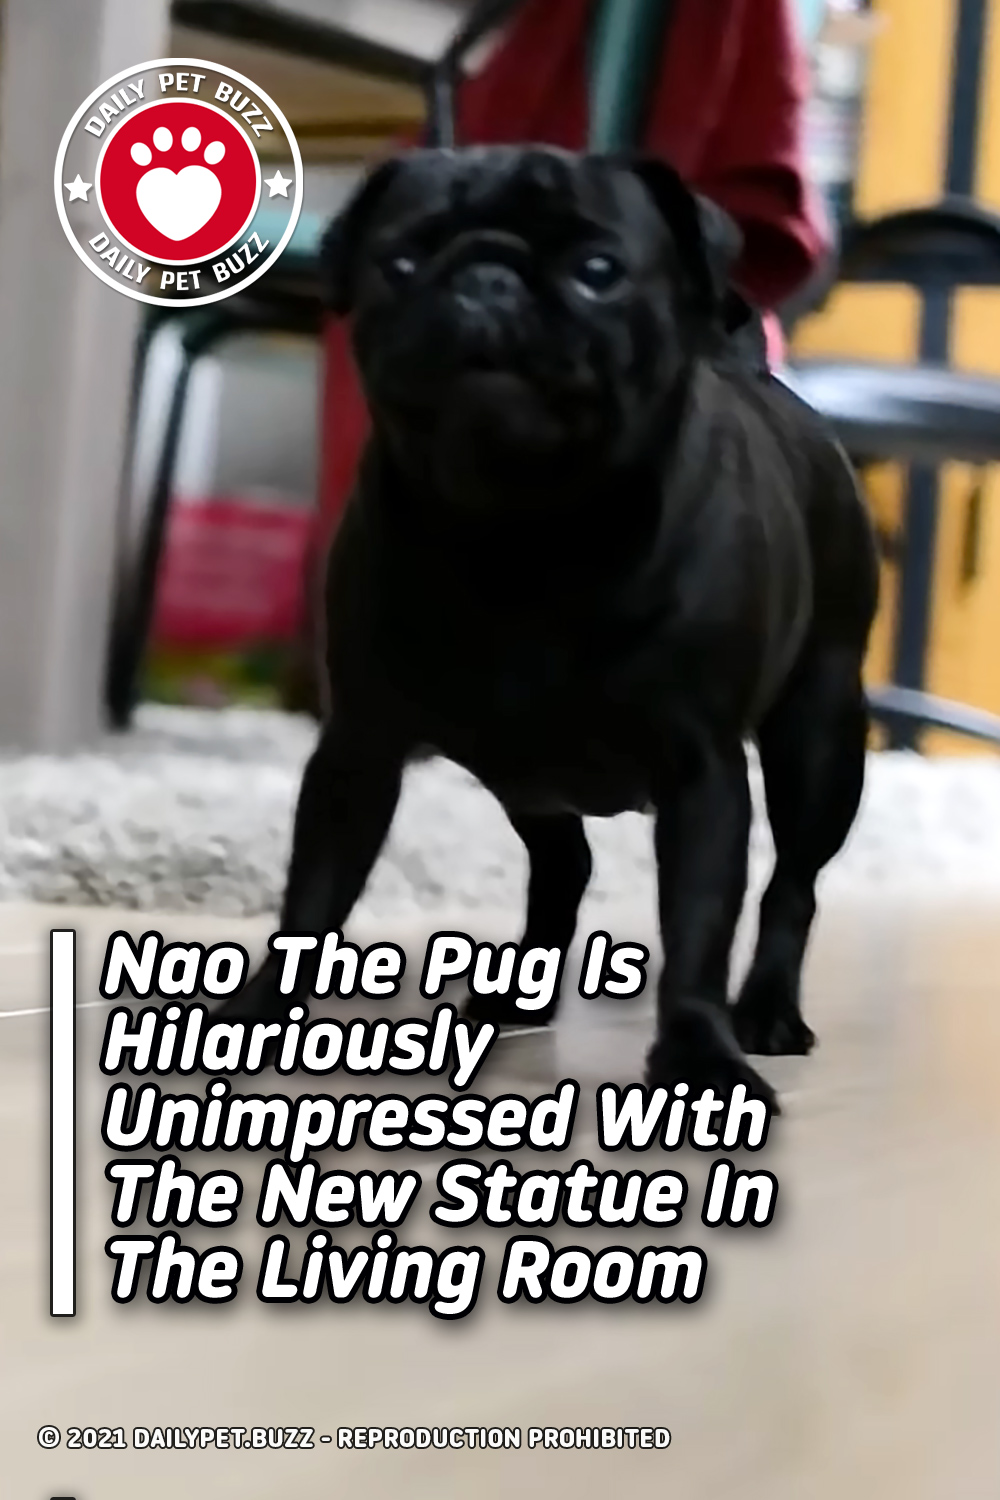 Nao The Pug Is Hilariously Unimpressed With The New Statue In The Living Room